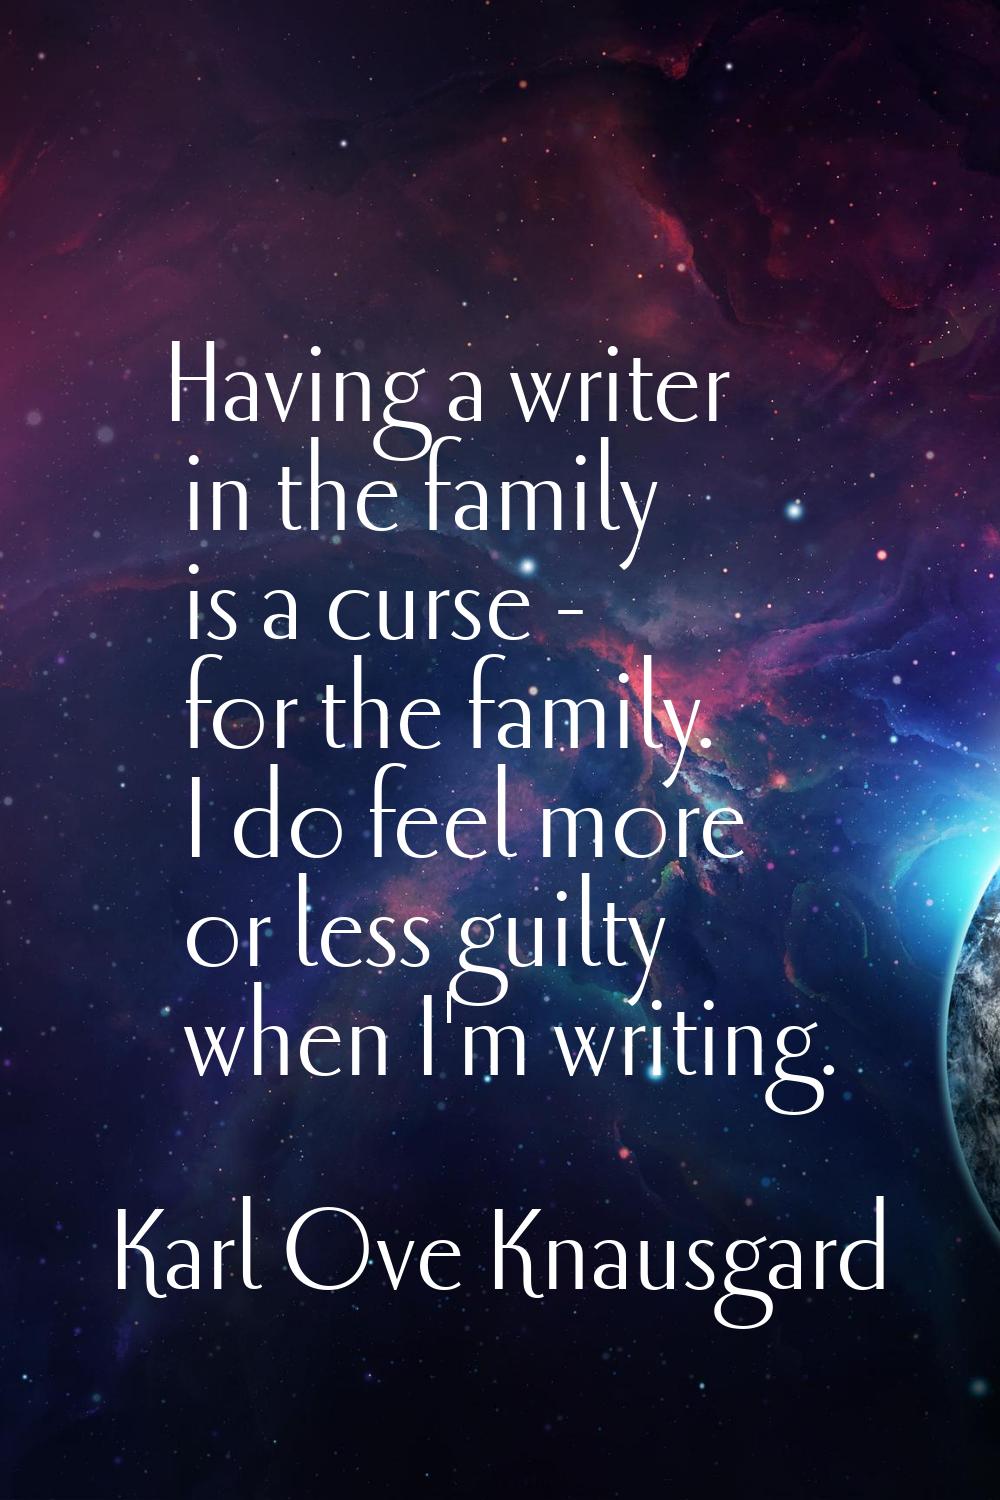 Having a writer in the family is a curse - for the family. I do feel more or less guilty when I'm w